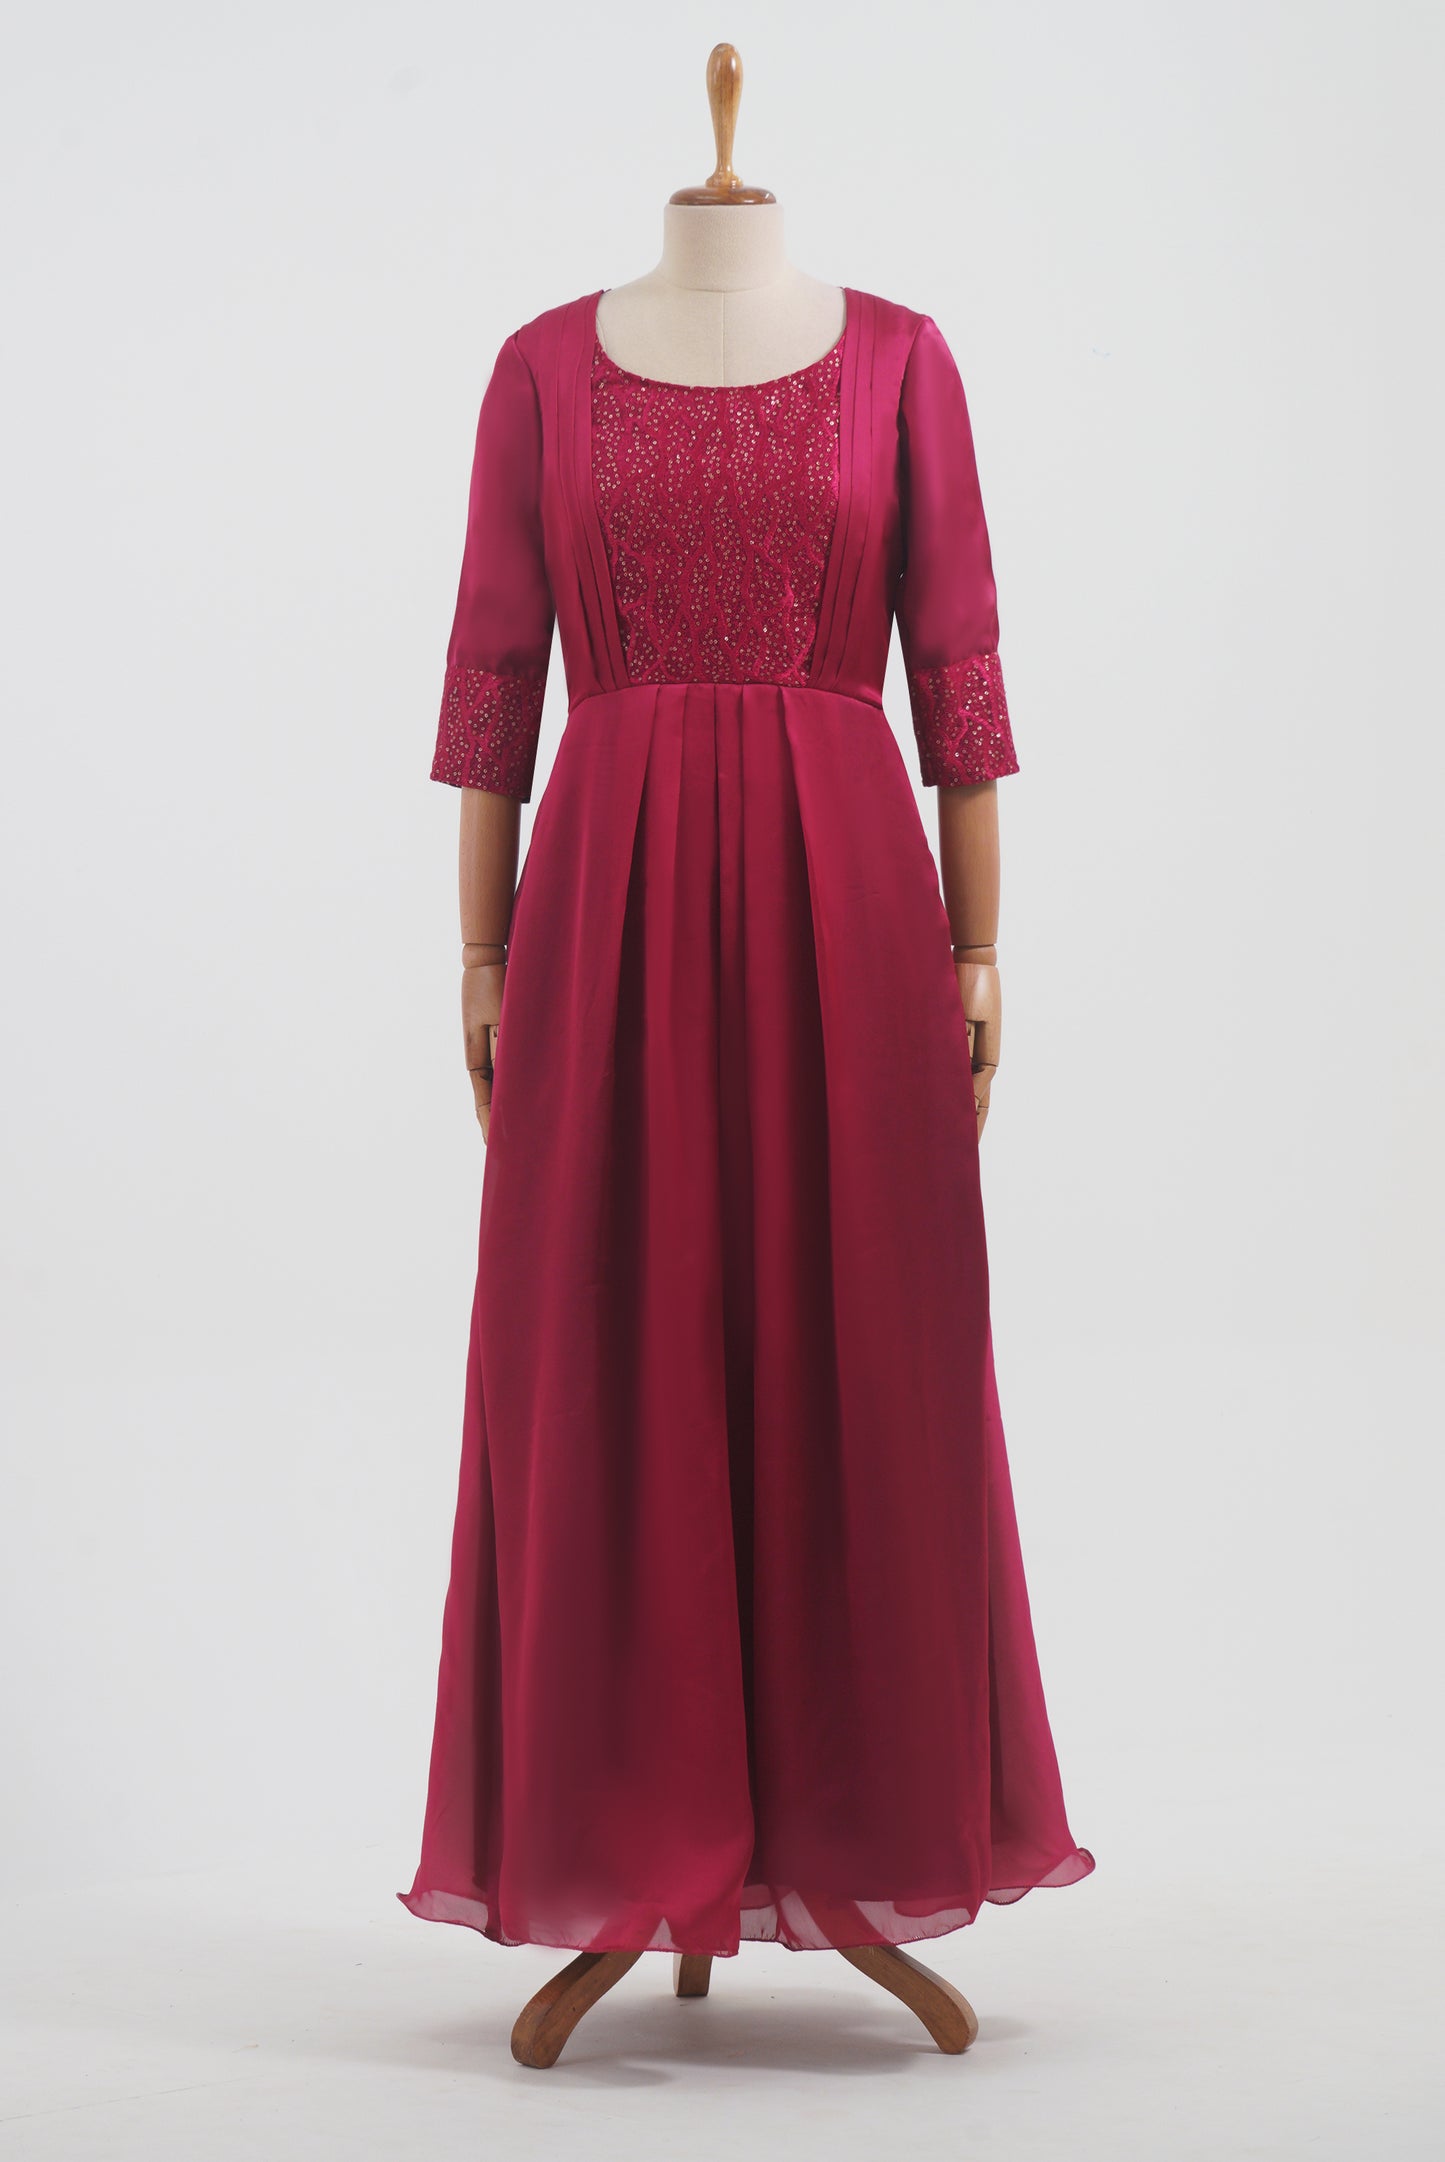 ZIA240 Dark Pink Pleated Full Length Gown